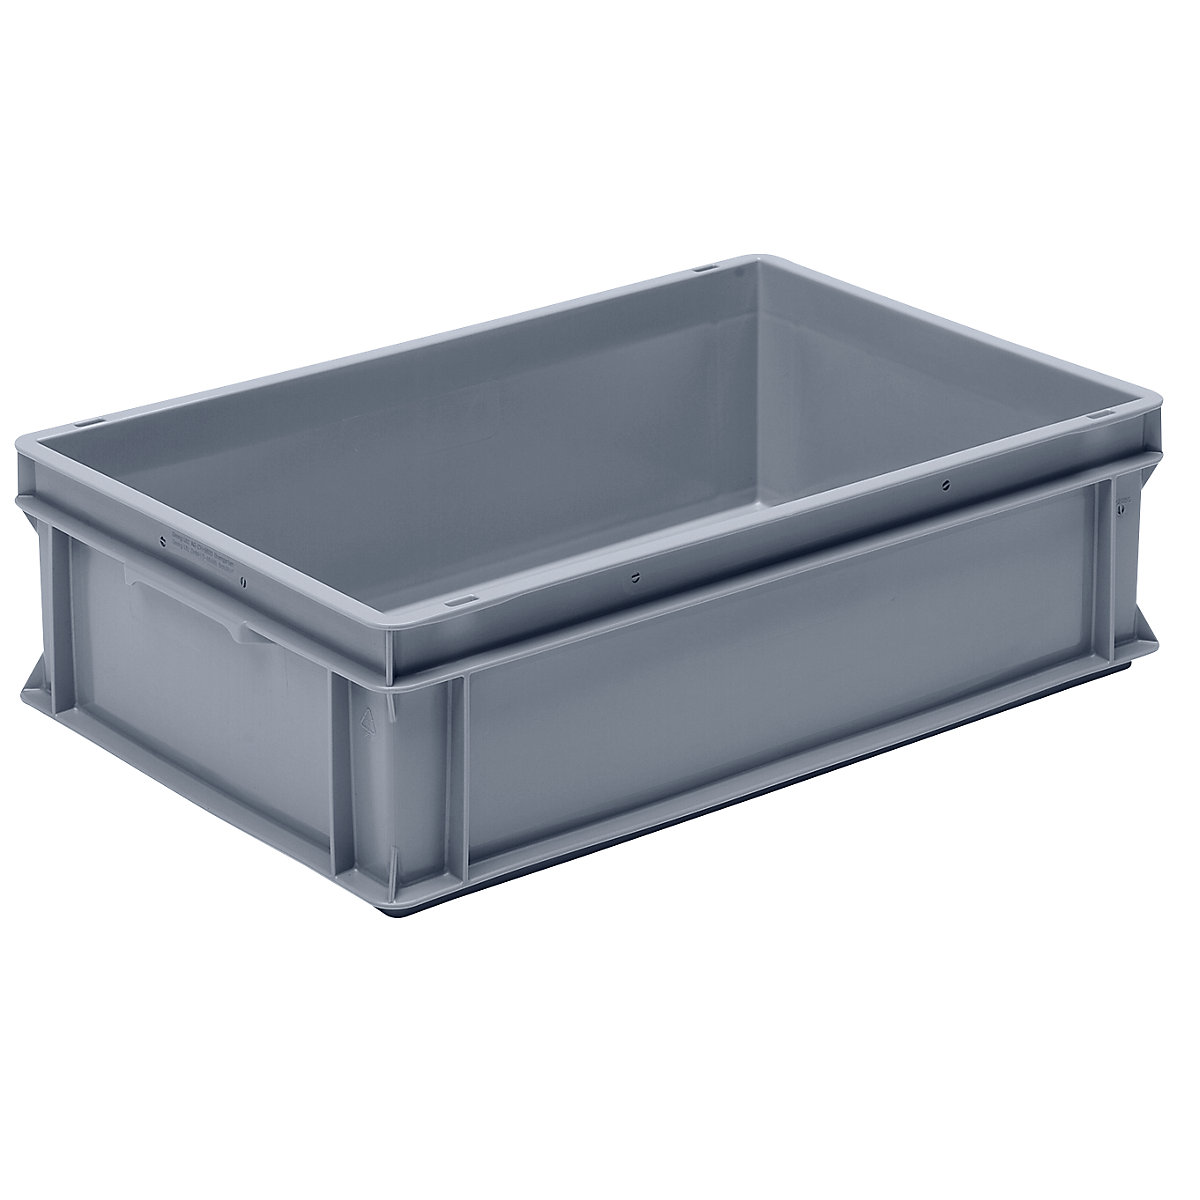 Euro stacking container made of polypropylene (PP), max. load 20 kg, silver grey, capacity 30 l, external height 170 mm, pack of 4